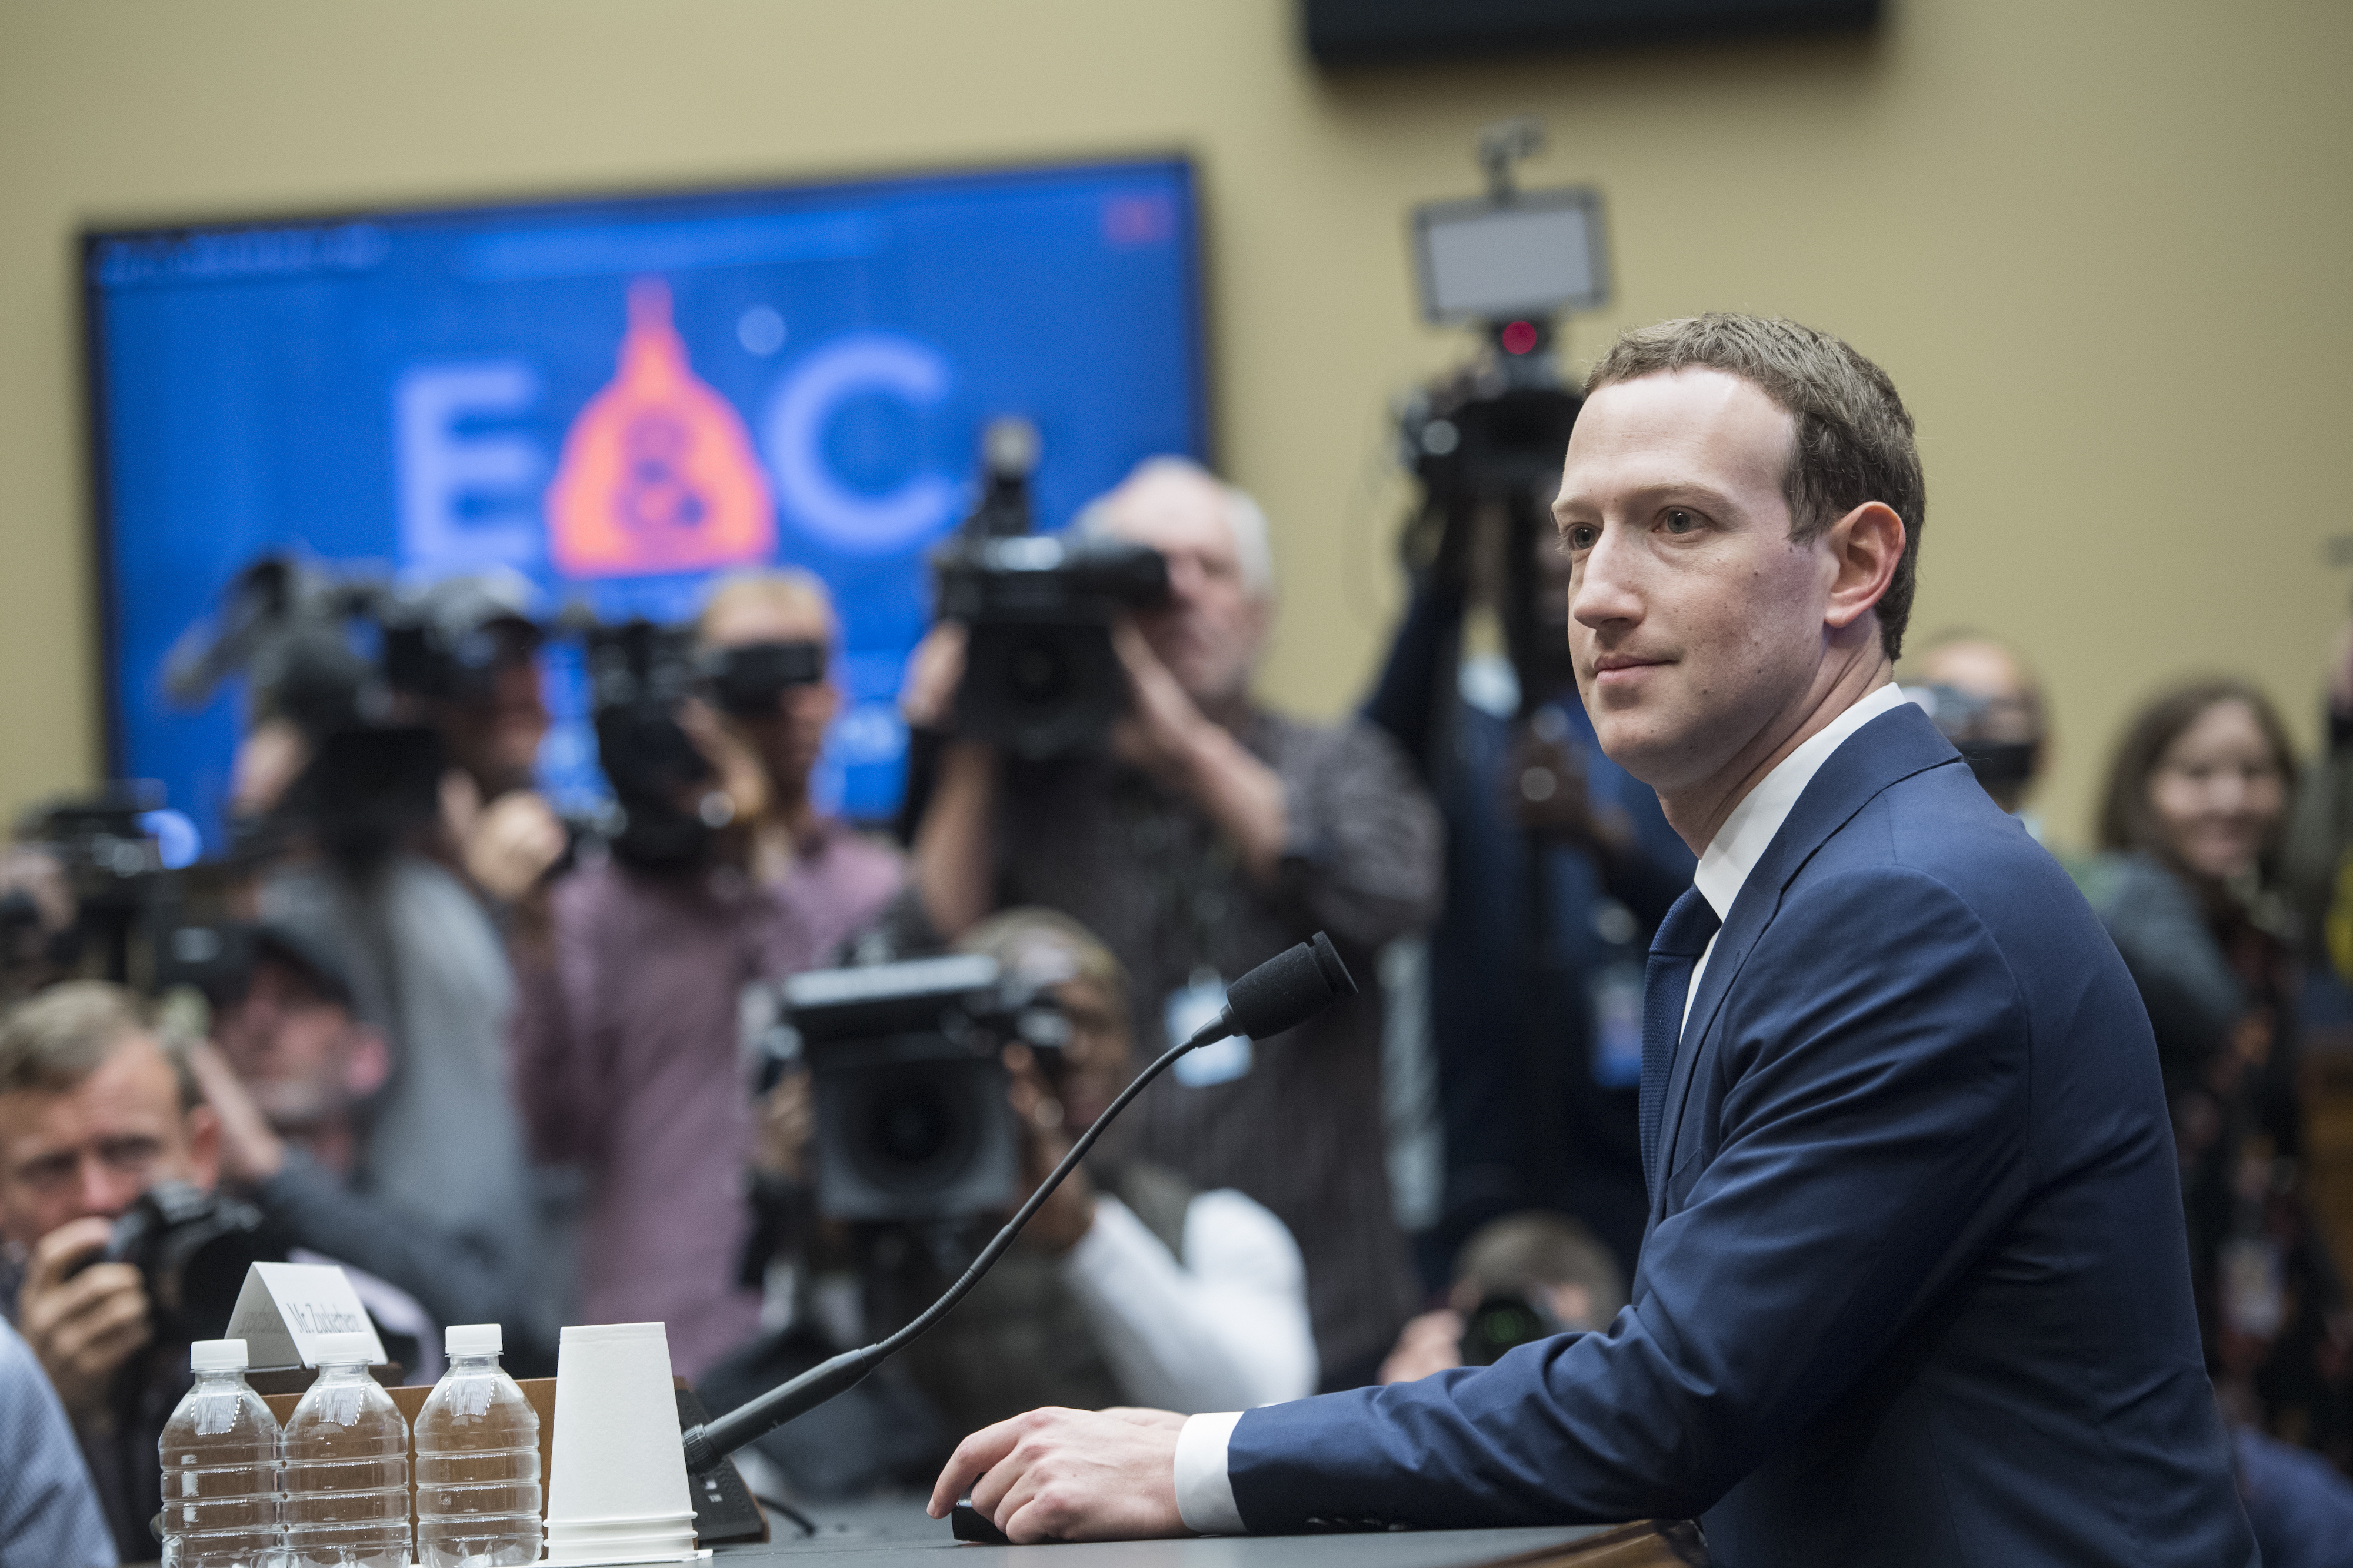 Facebook CEO Mark Zuckerberg prepares to testify before a House Energy and Commerce Committee in Rayburn Building on the protection of user data on April 11, 2018. (Tom Williams/CQ Roll Call)